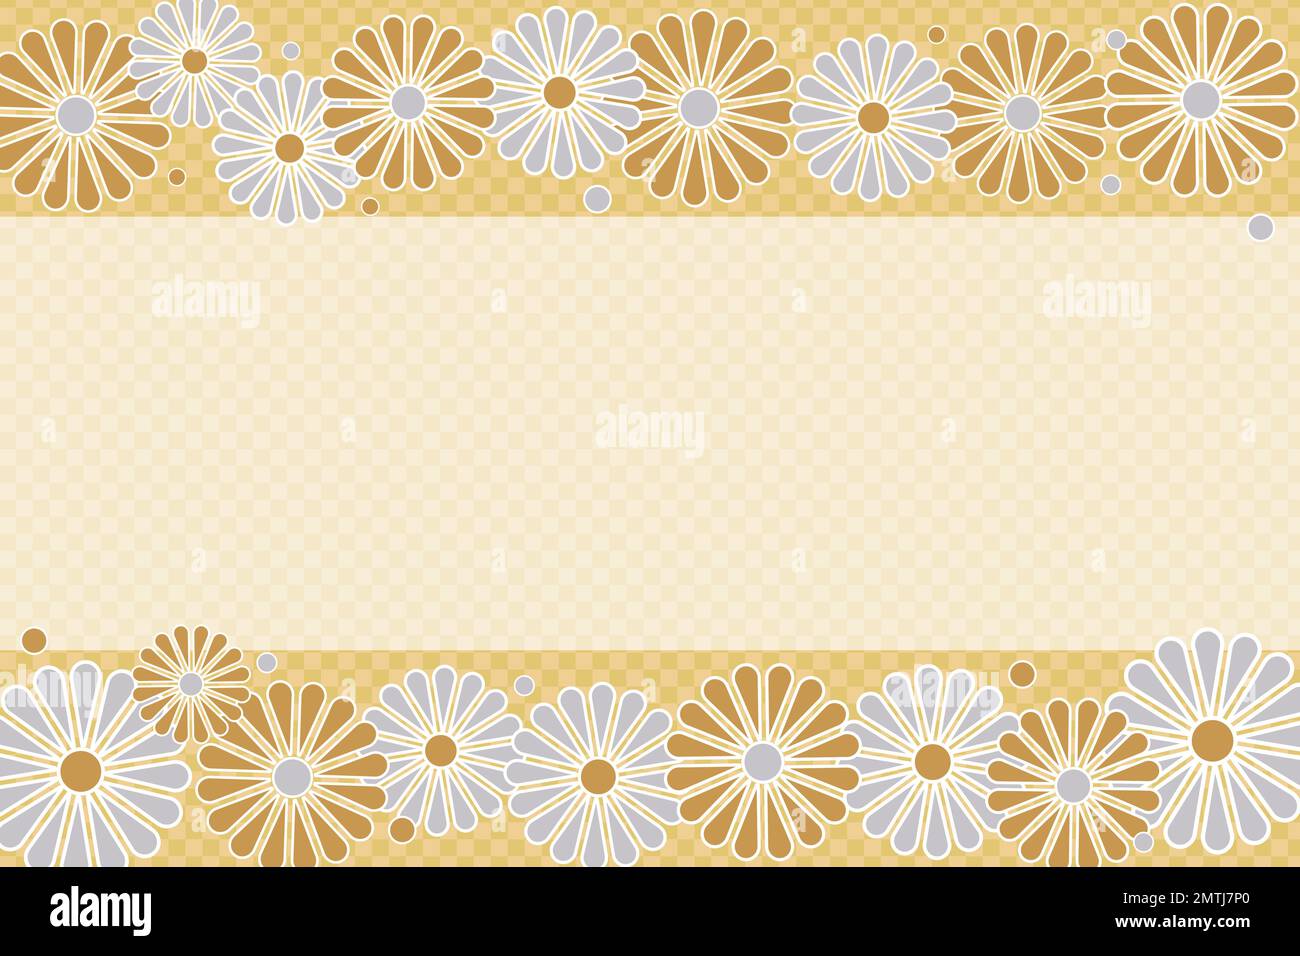 Gold and silver flowers frame on a checkered background Stock Vector